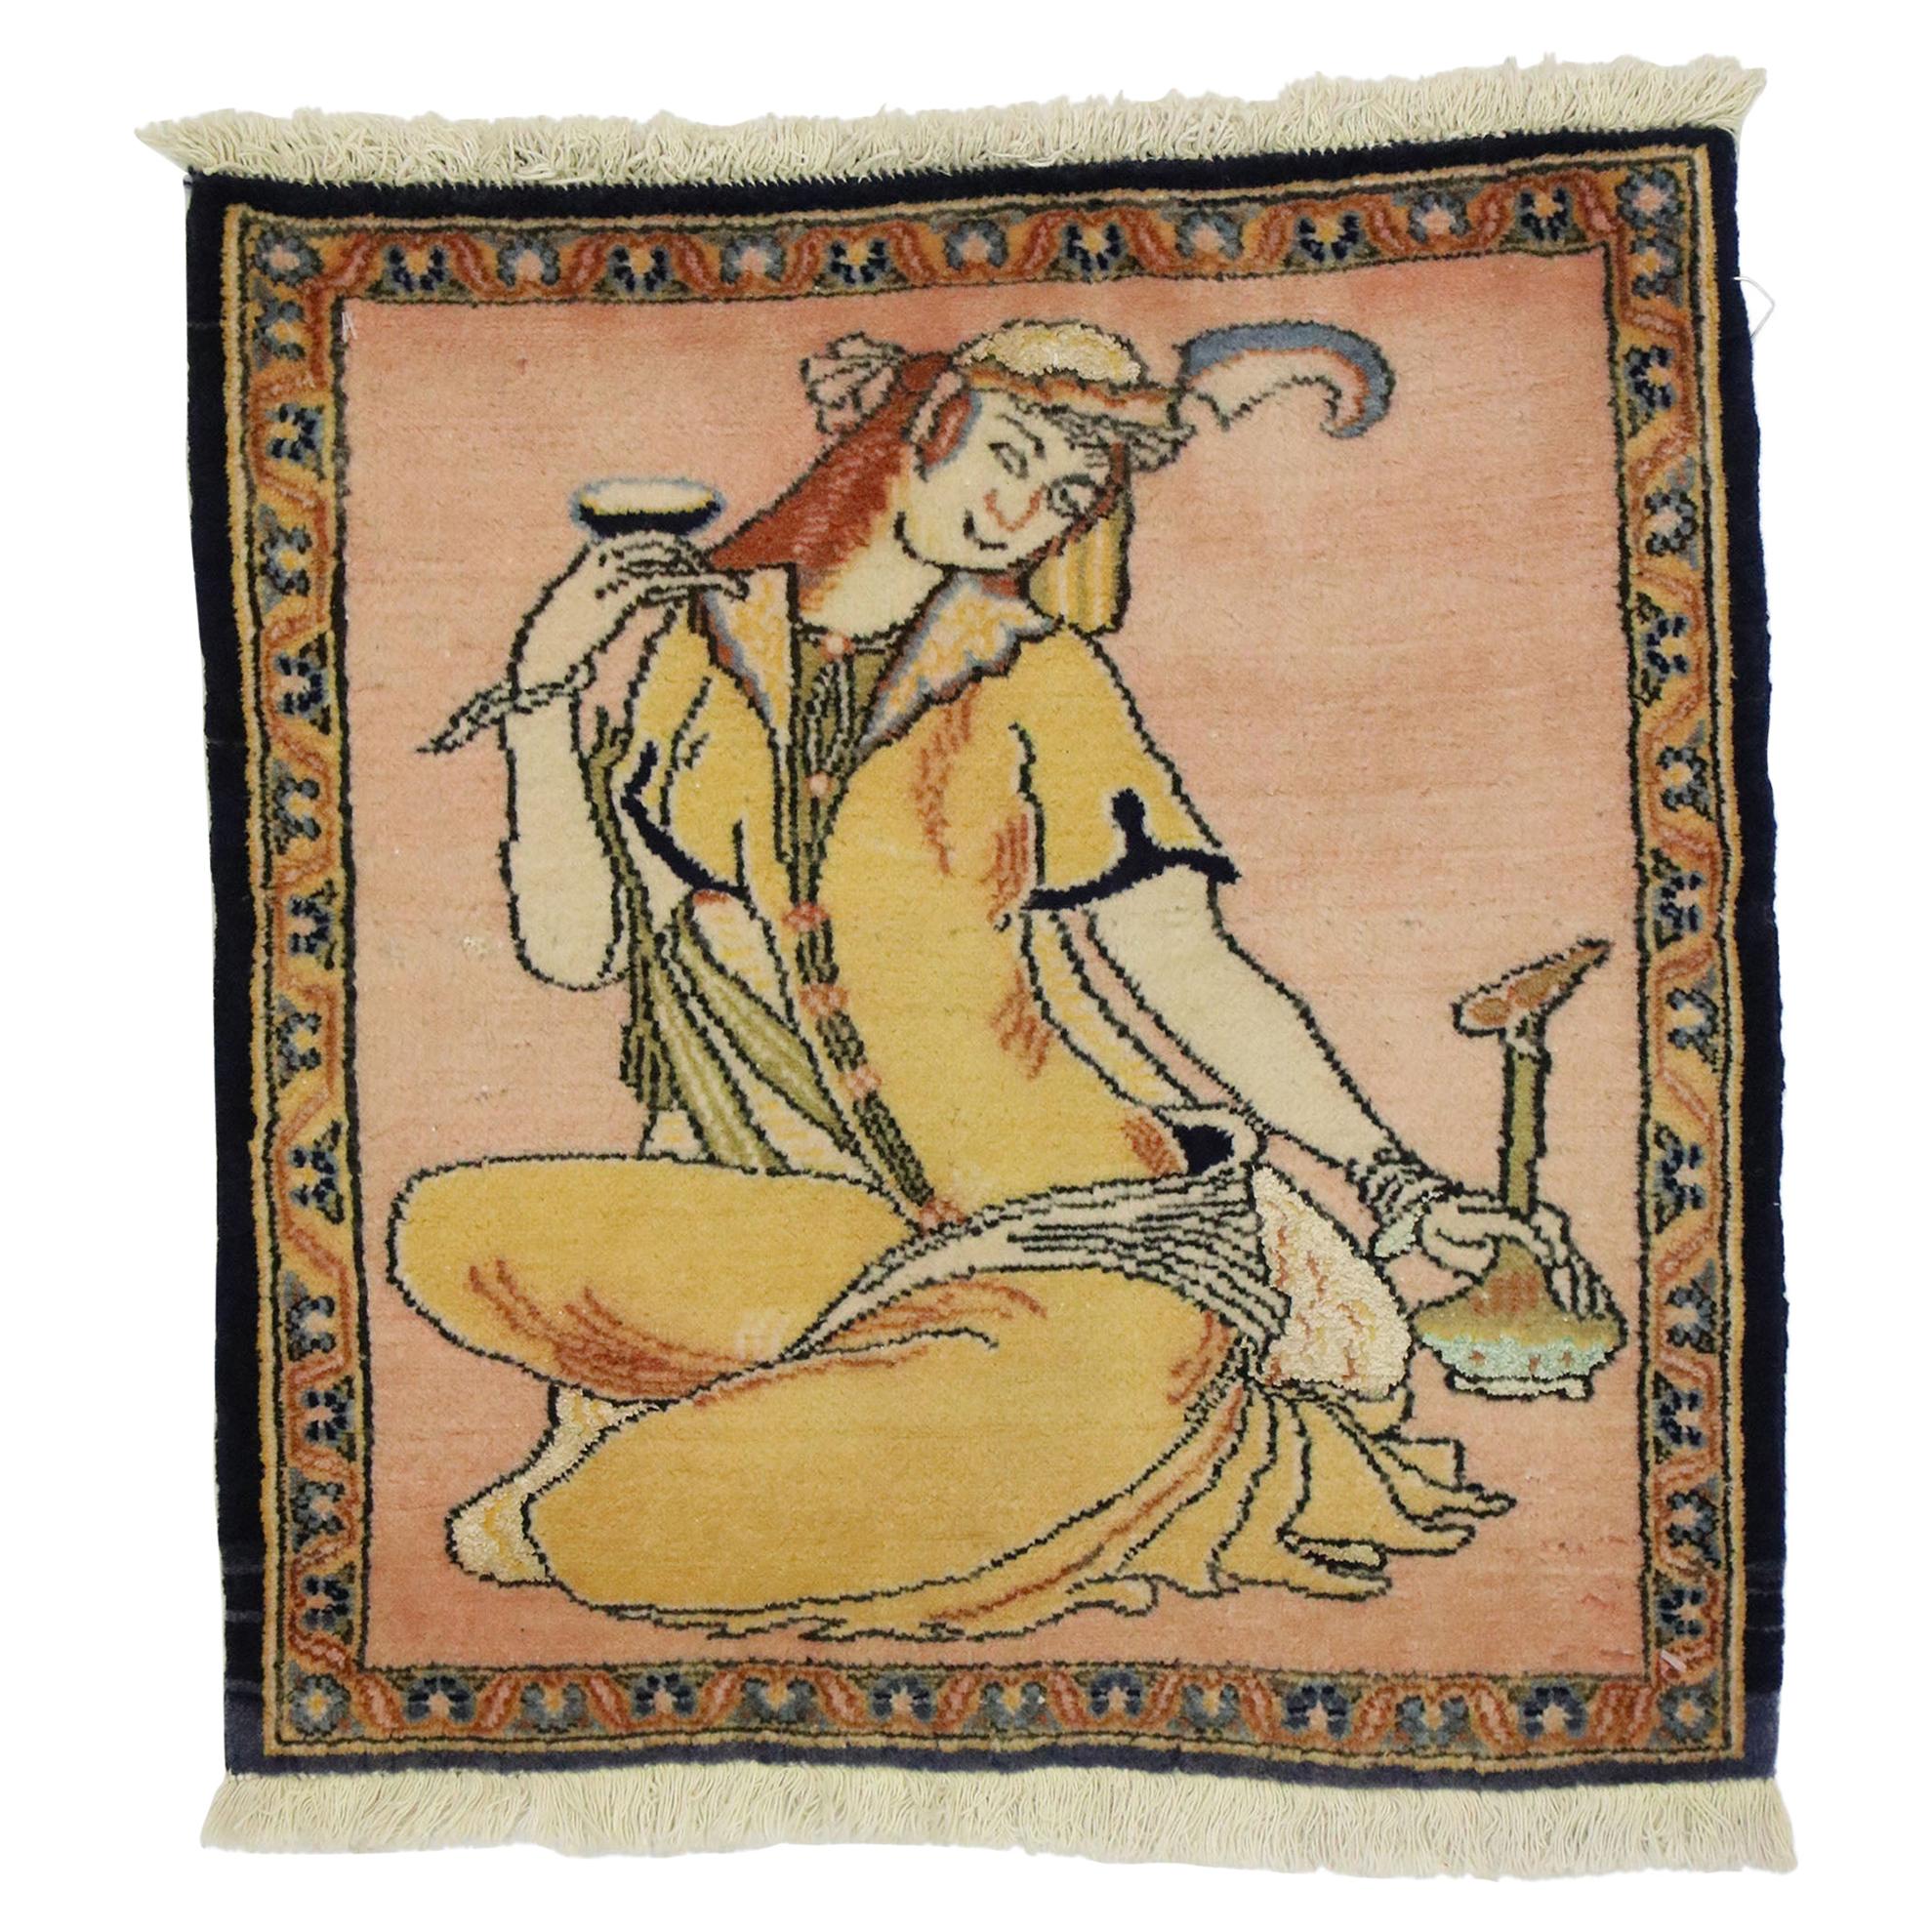 Vintage Persian Khamseh Pictorial Rug with Dervish Scene, Persian Wall Hanging For Sale